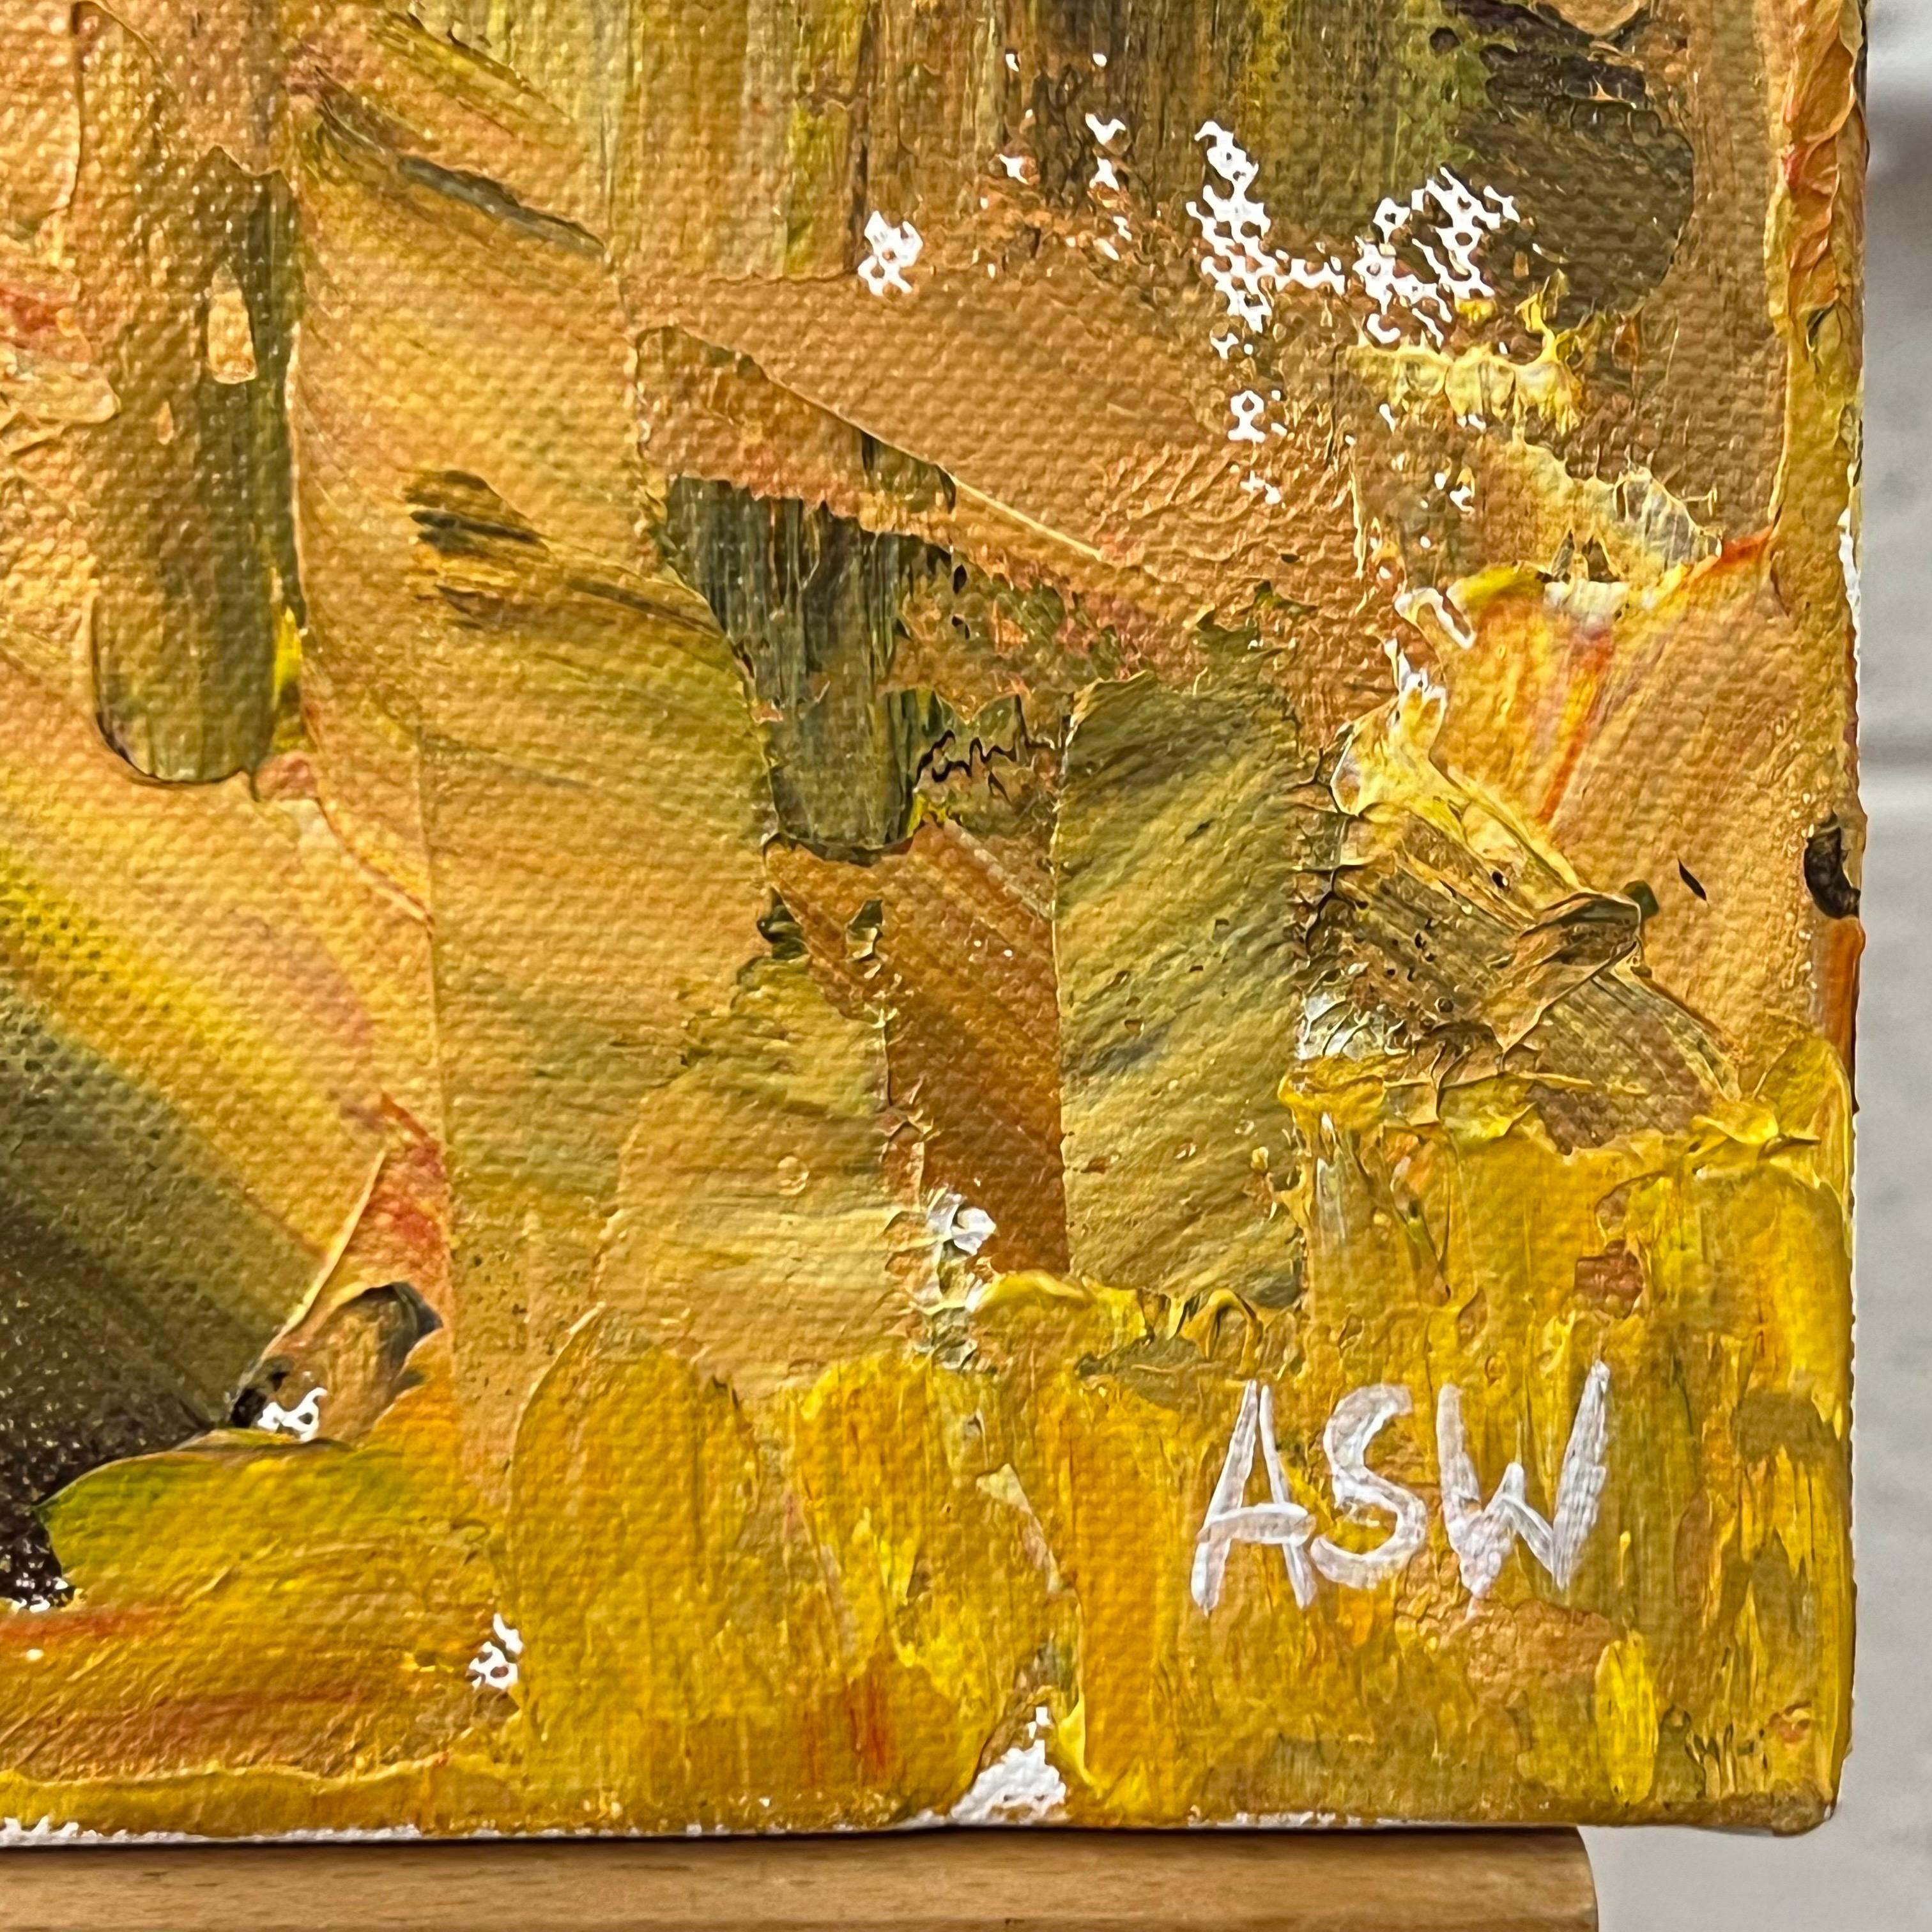 Golden Yellow Abstract Landscape Painting of Los Angeles by Contemporary British Artist, Angela Wakefield. This unique original is a highly textured expressive interpretation of the City of Angels using a palette knife, reminiscent of her early